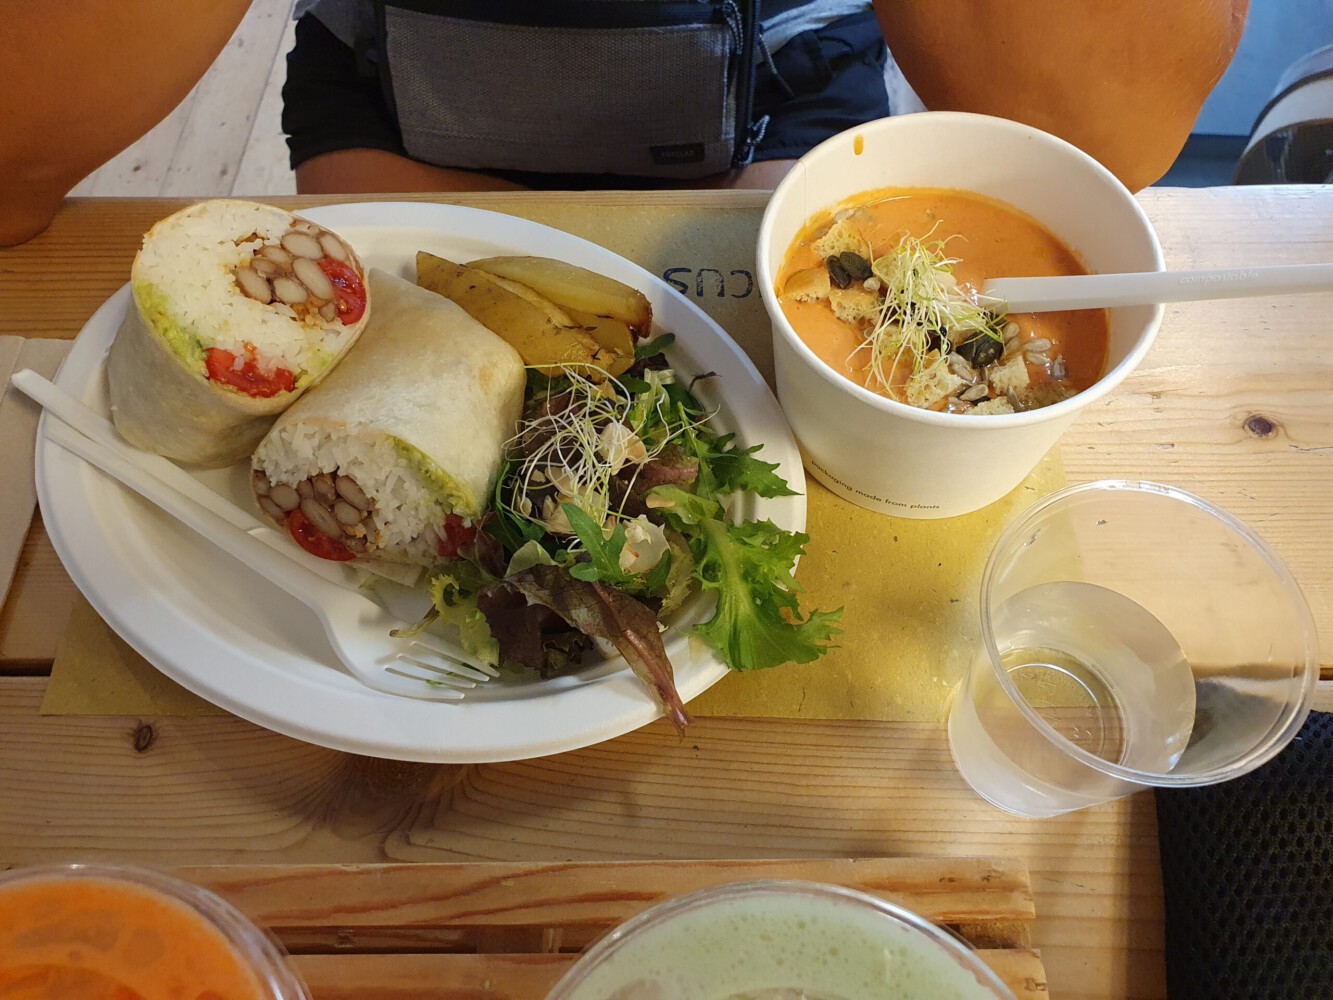 Soup and wrap at the vegan restaurant.